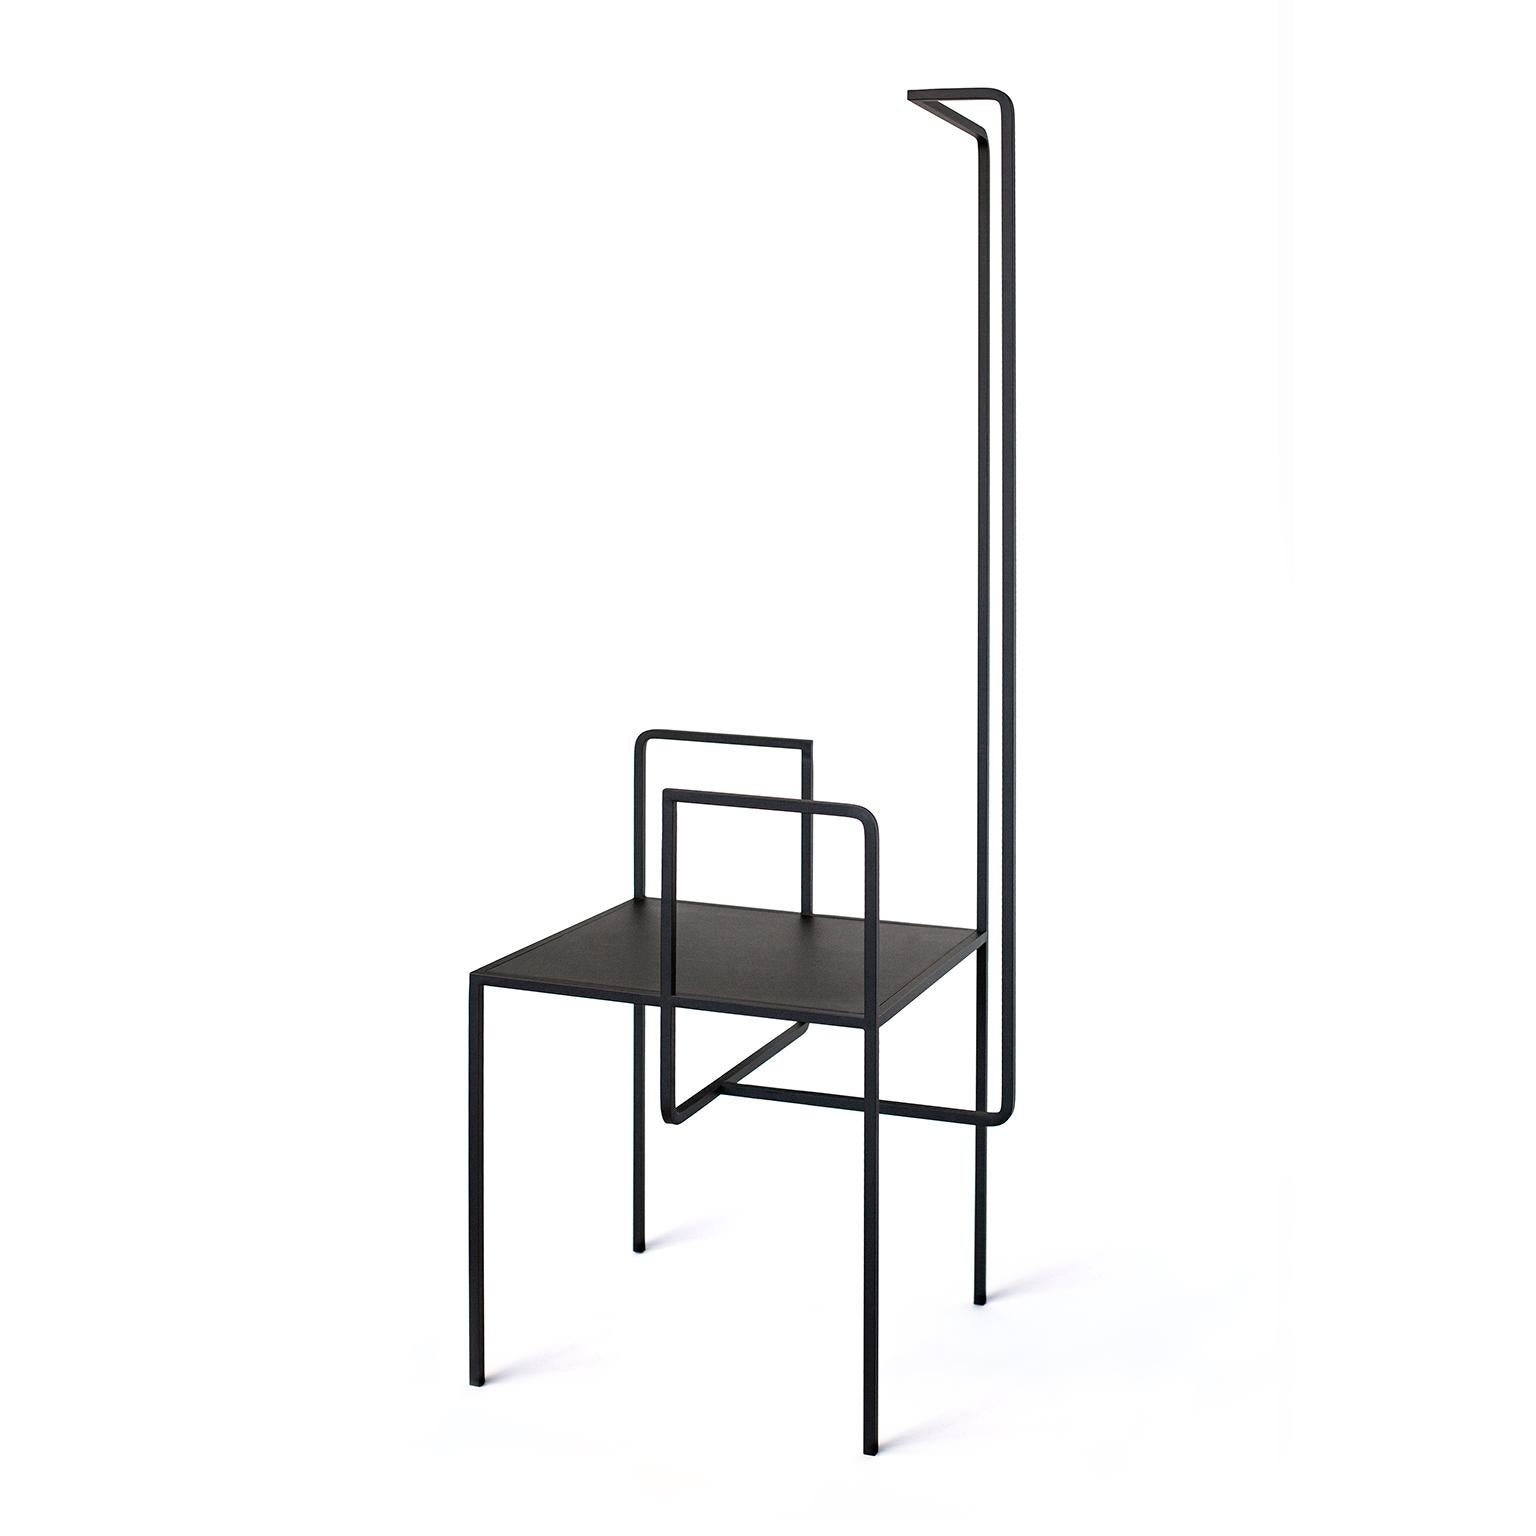 Powder-Coated Modern Steel Chair AI in Black by Studio 1+11 , 21st Century Germany